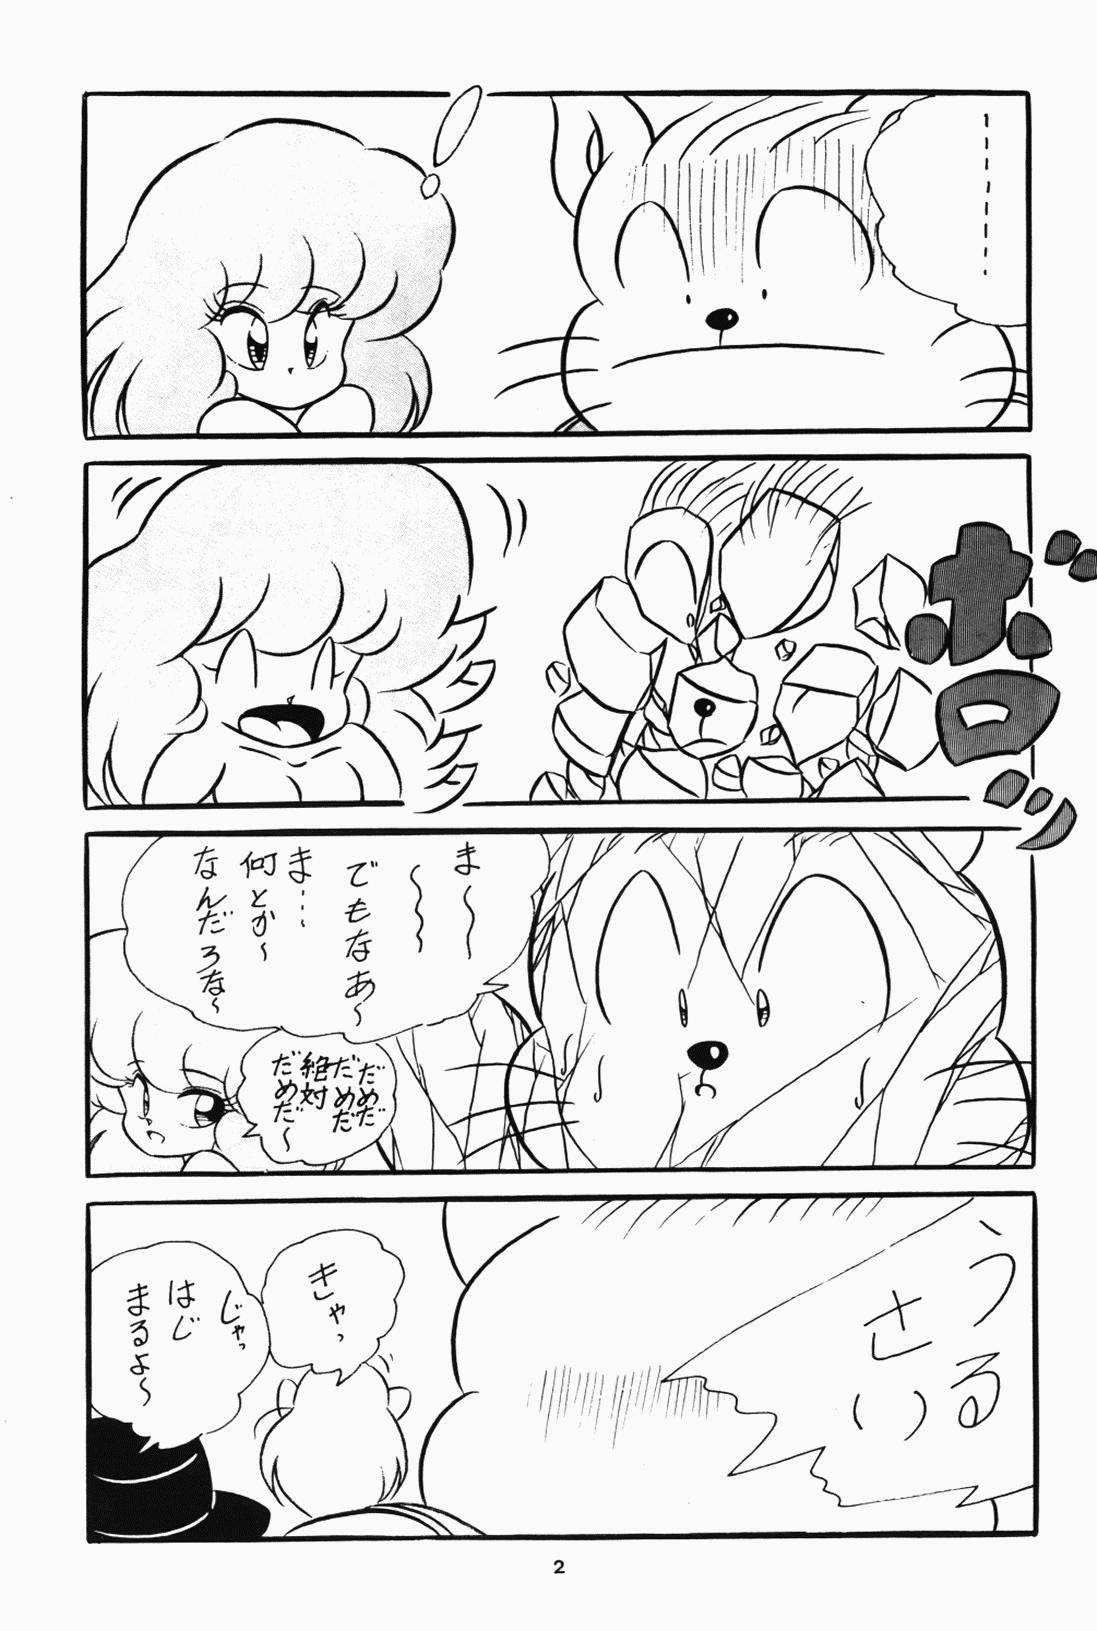 Rola C-Company Special Stage 07 - Ranma 12 Daring - Page 7